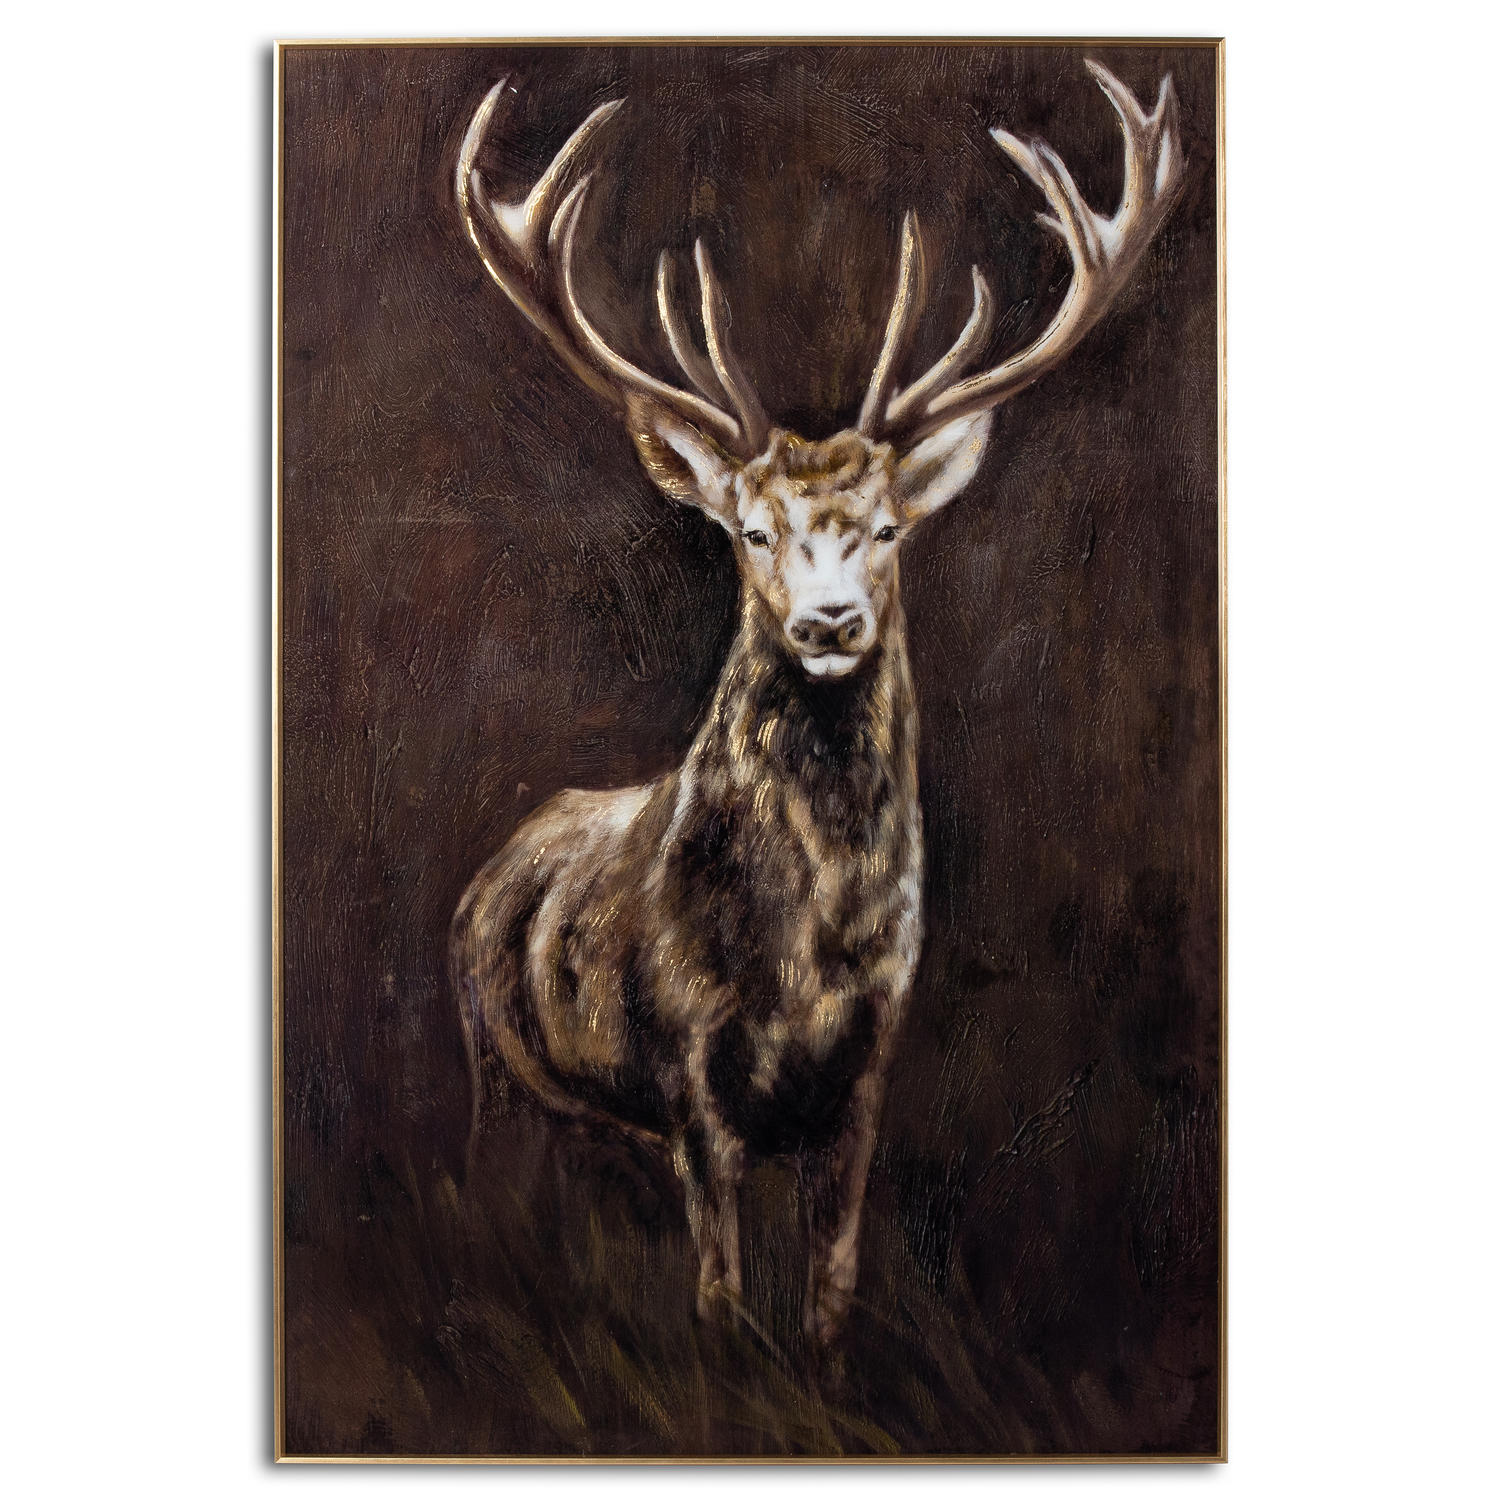 Royal Stag Glass Image In Gold Frame - Image 1